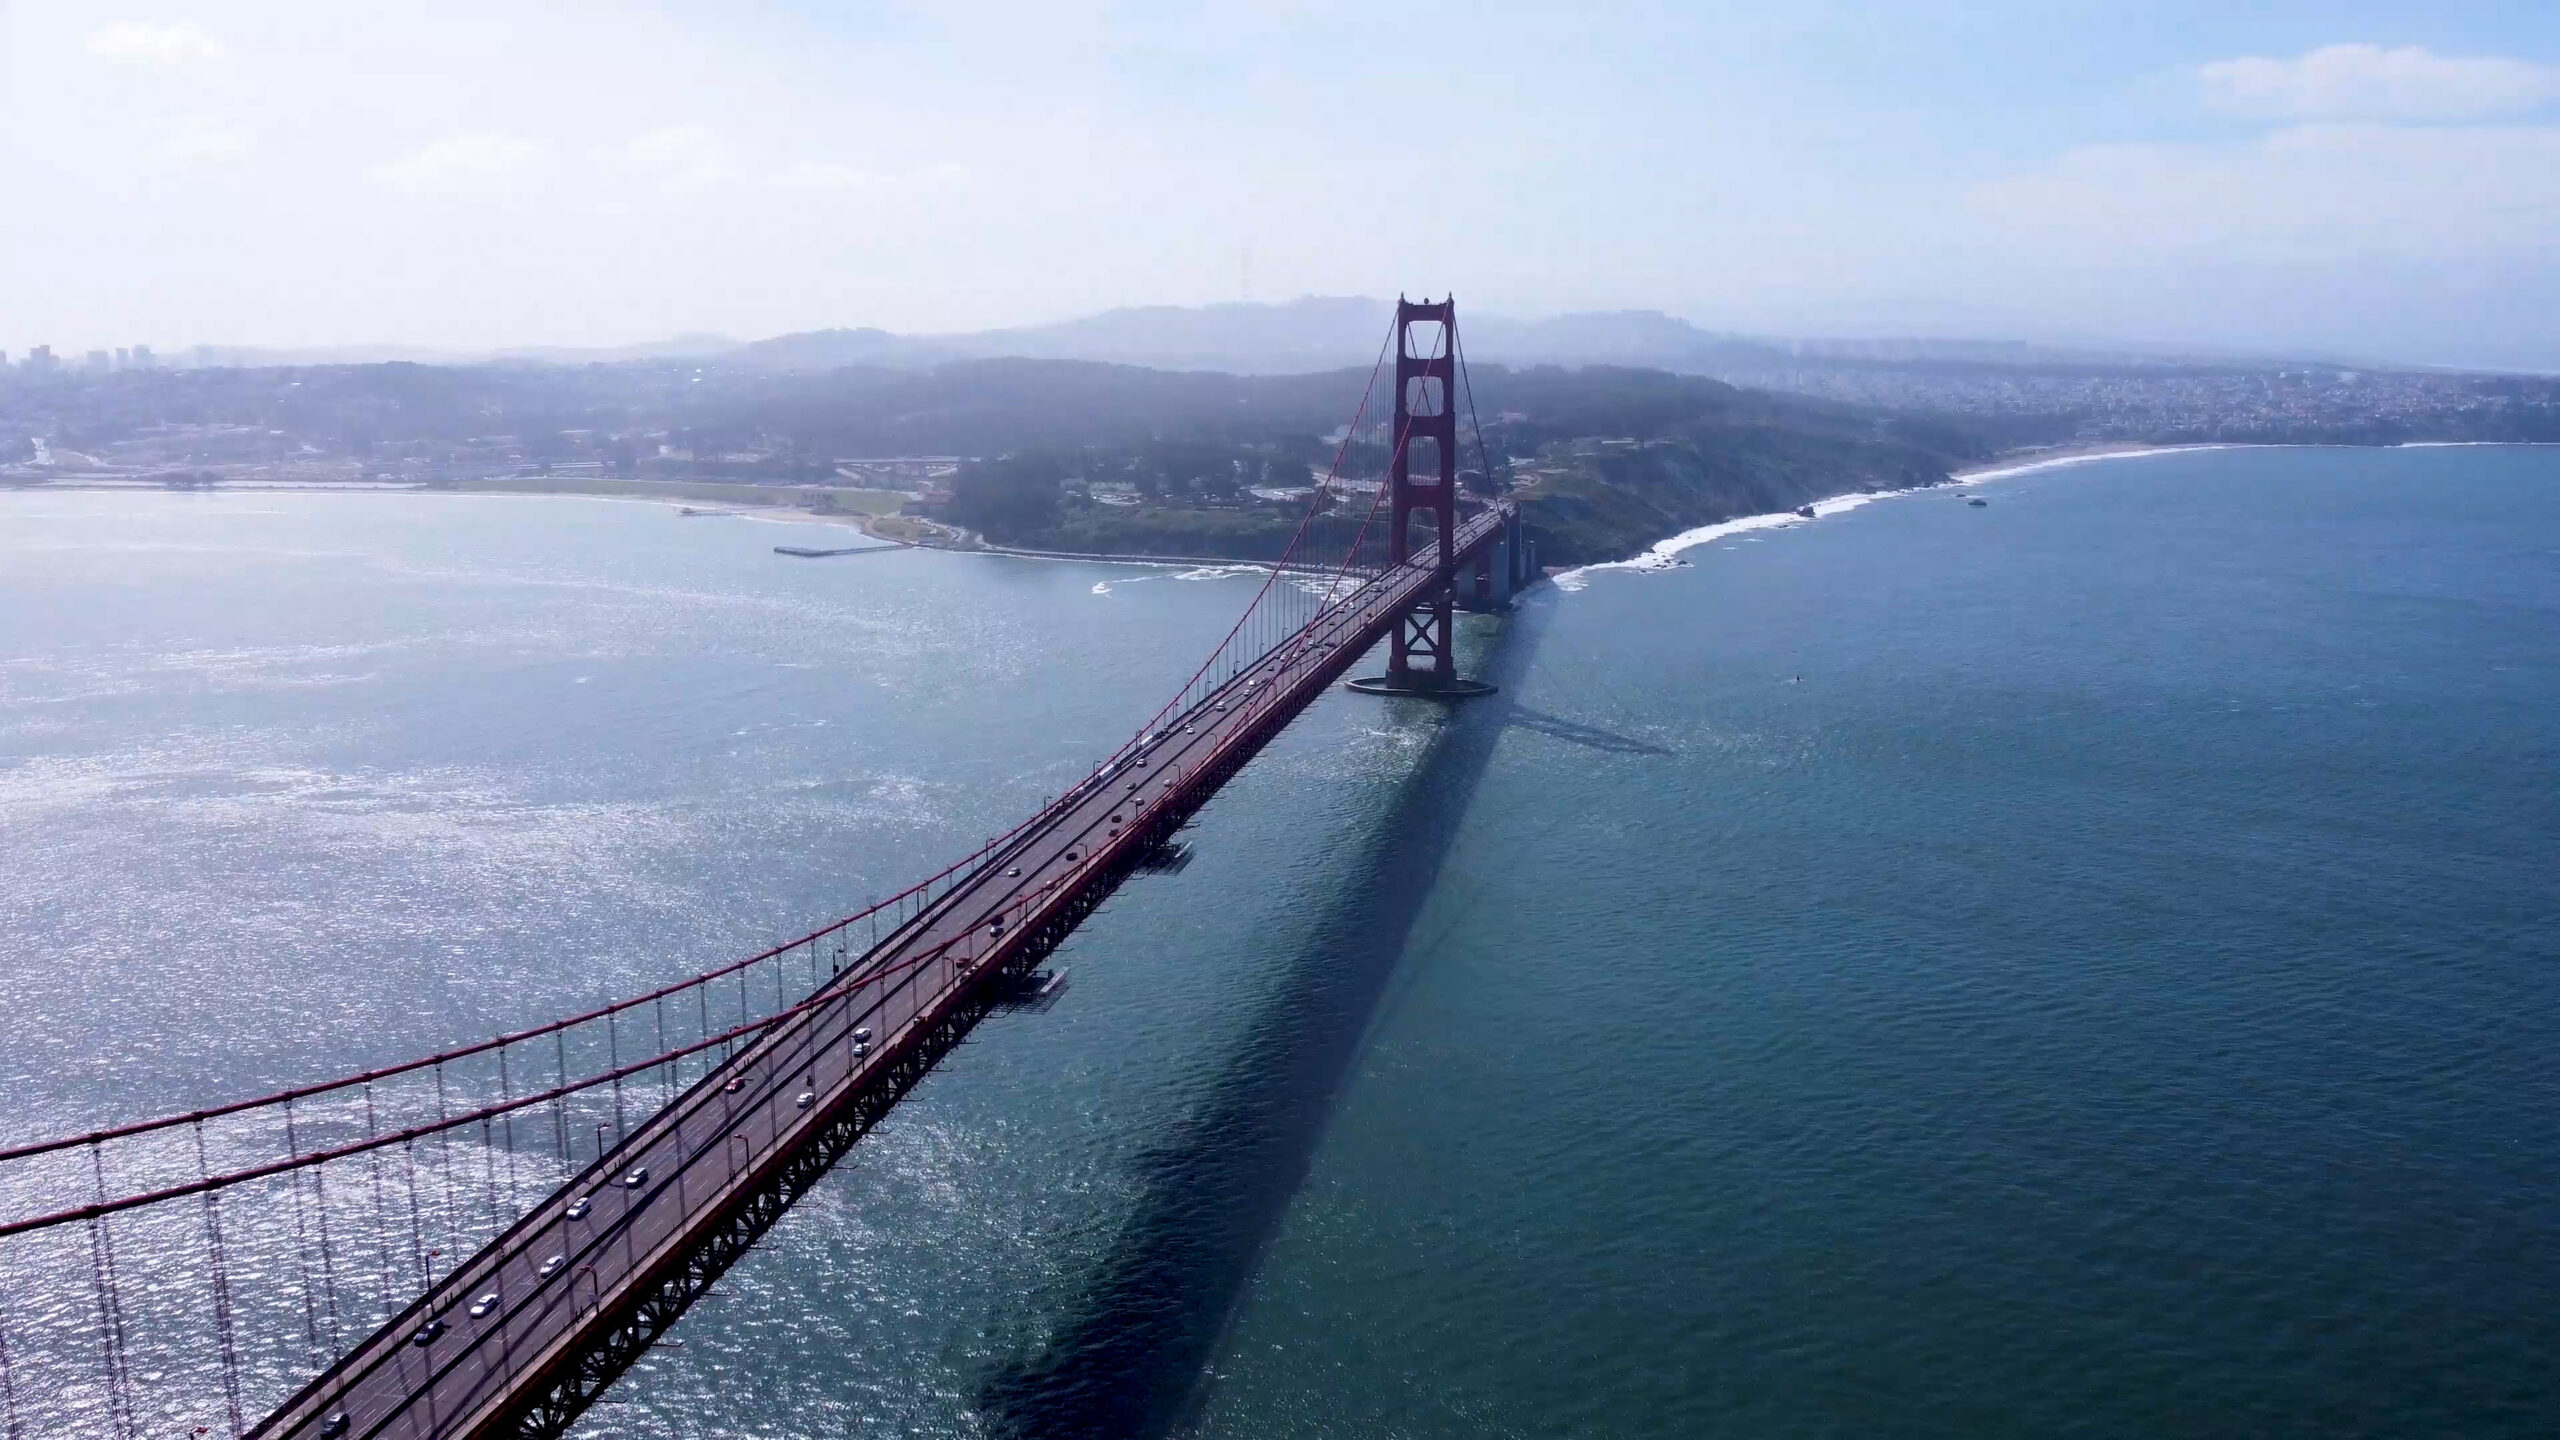 An arial image of the golden gate bridge on a slightly hazy day under a blue sky